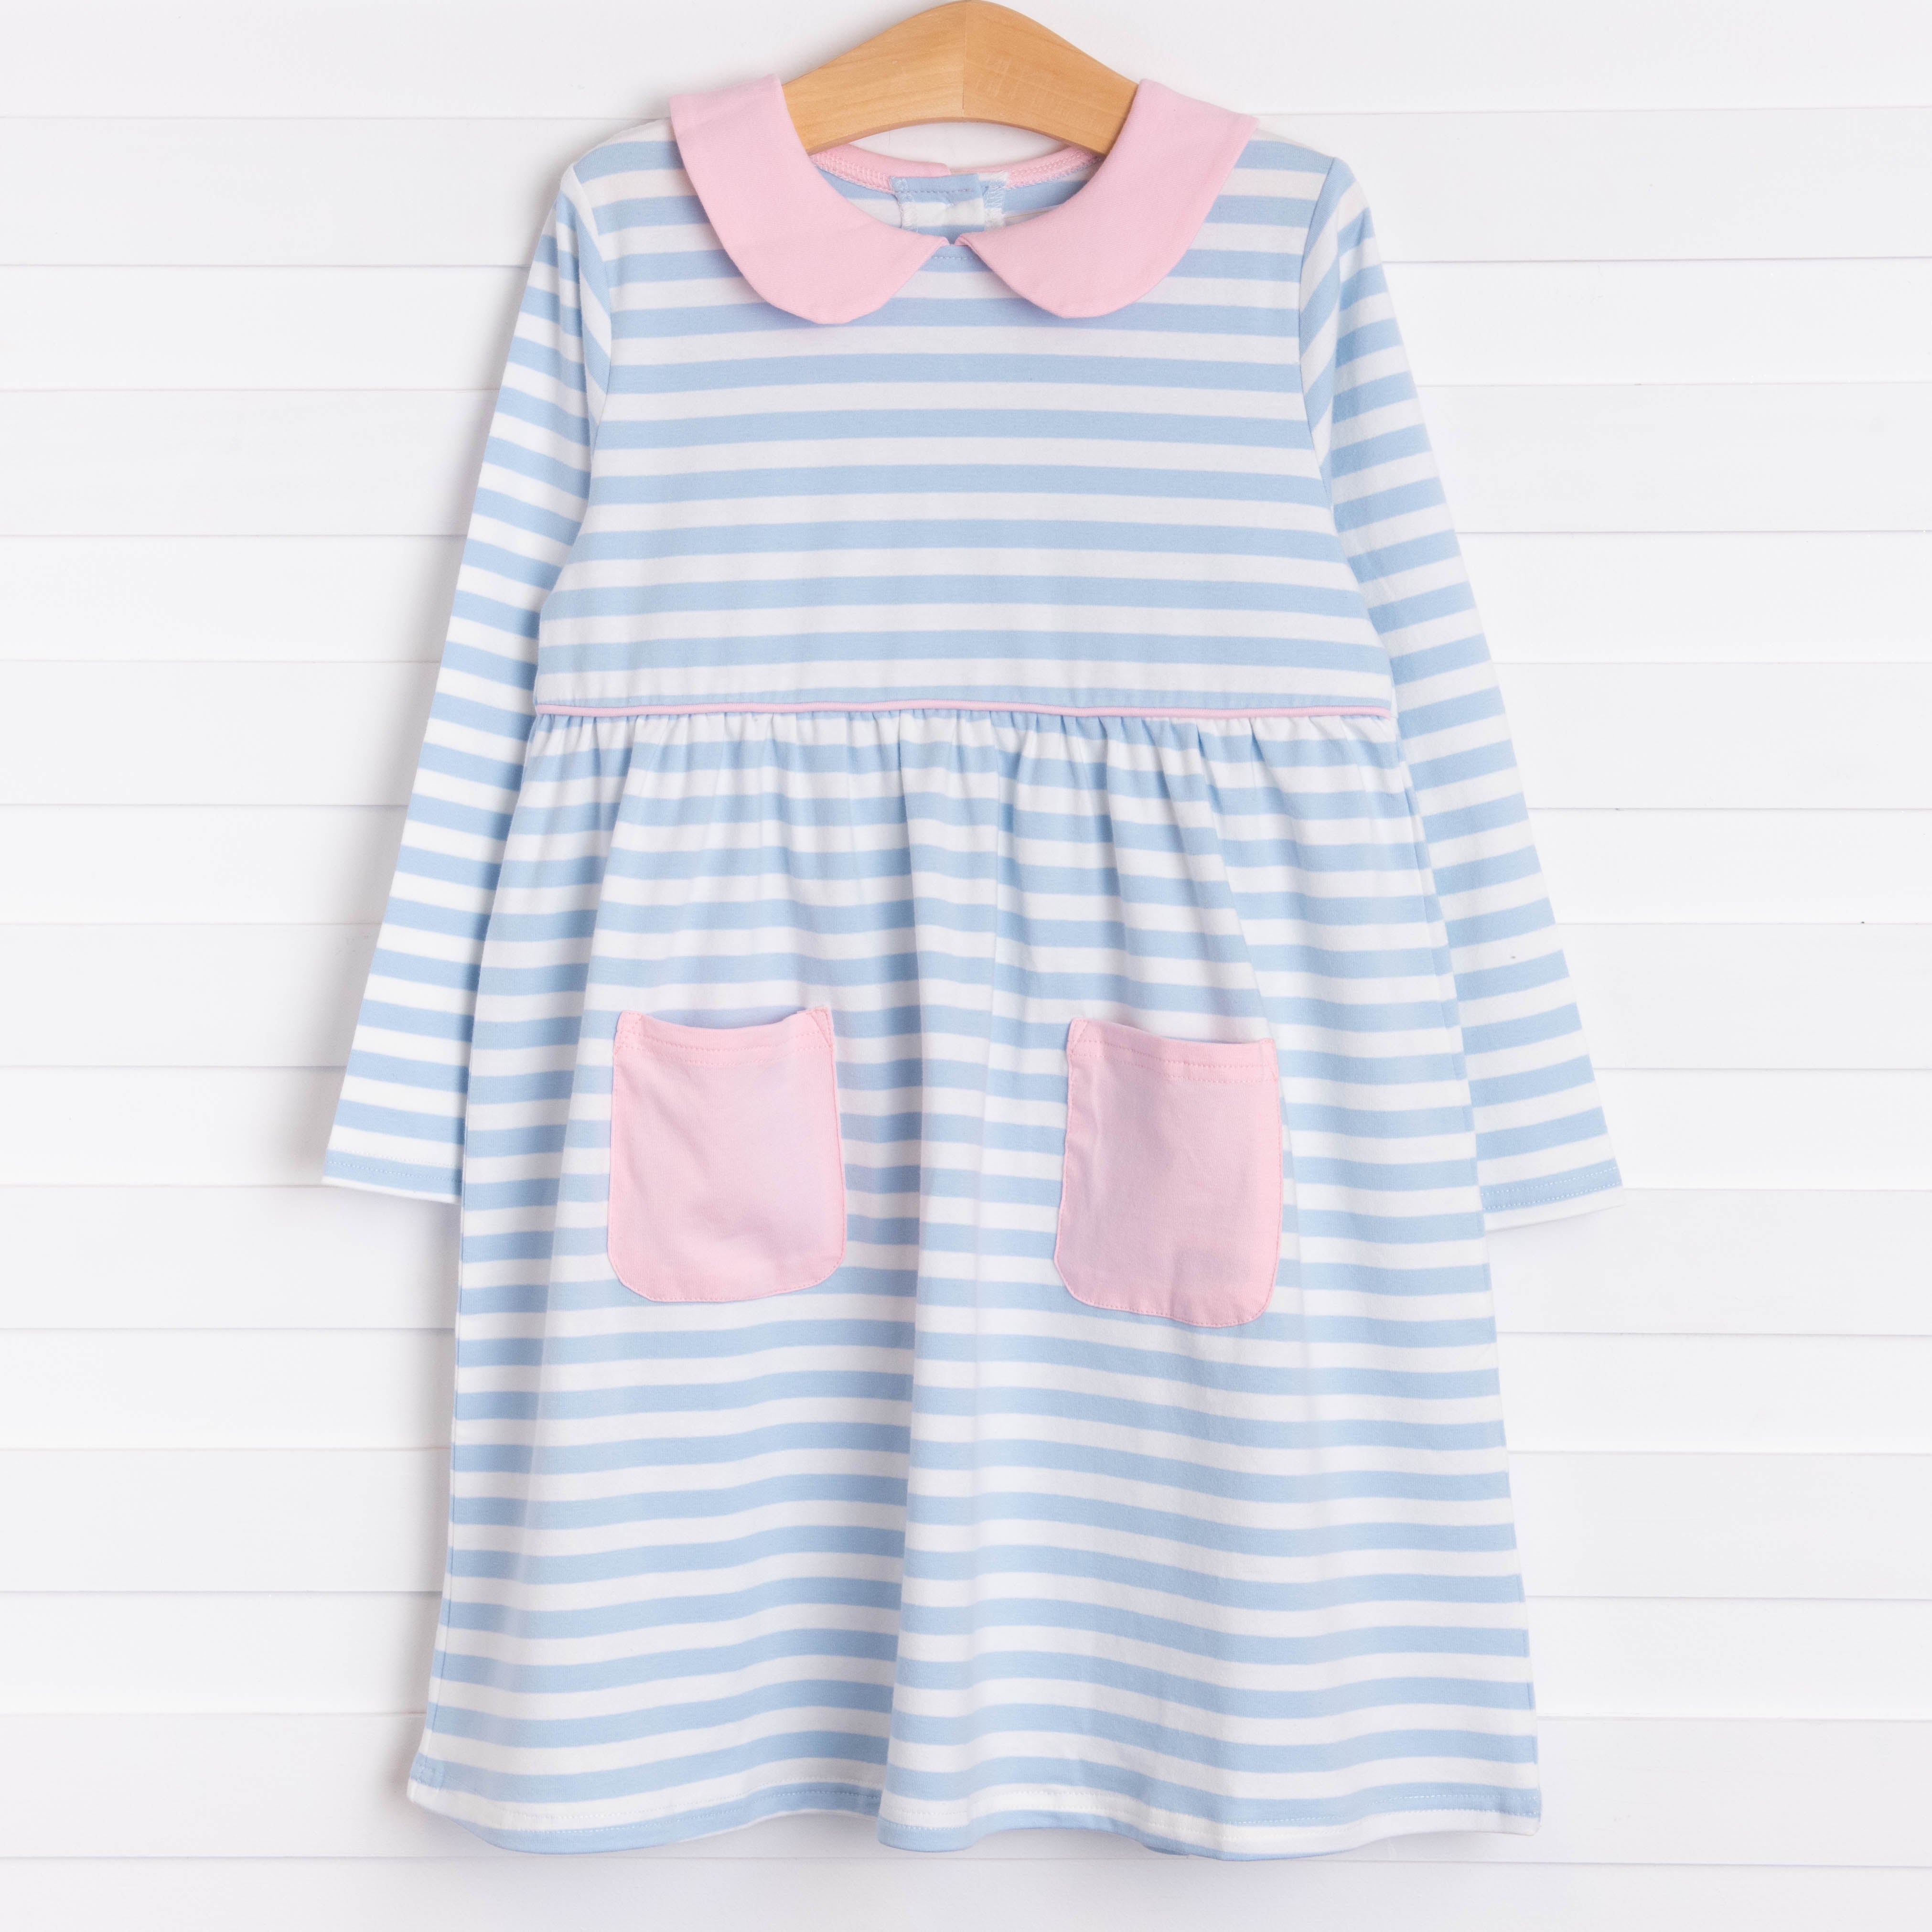 Lauren Dress, Blue and Pink – Stitchy Fish